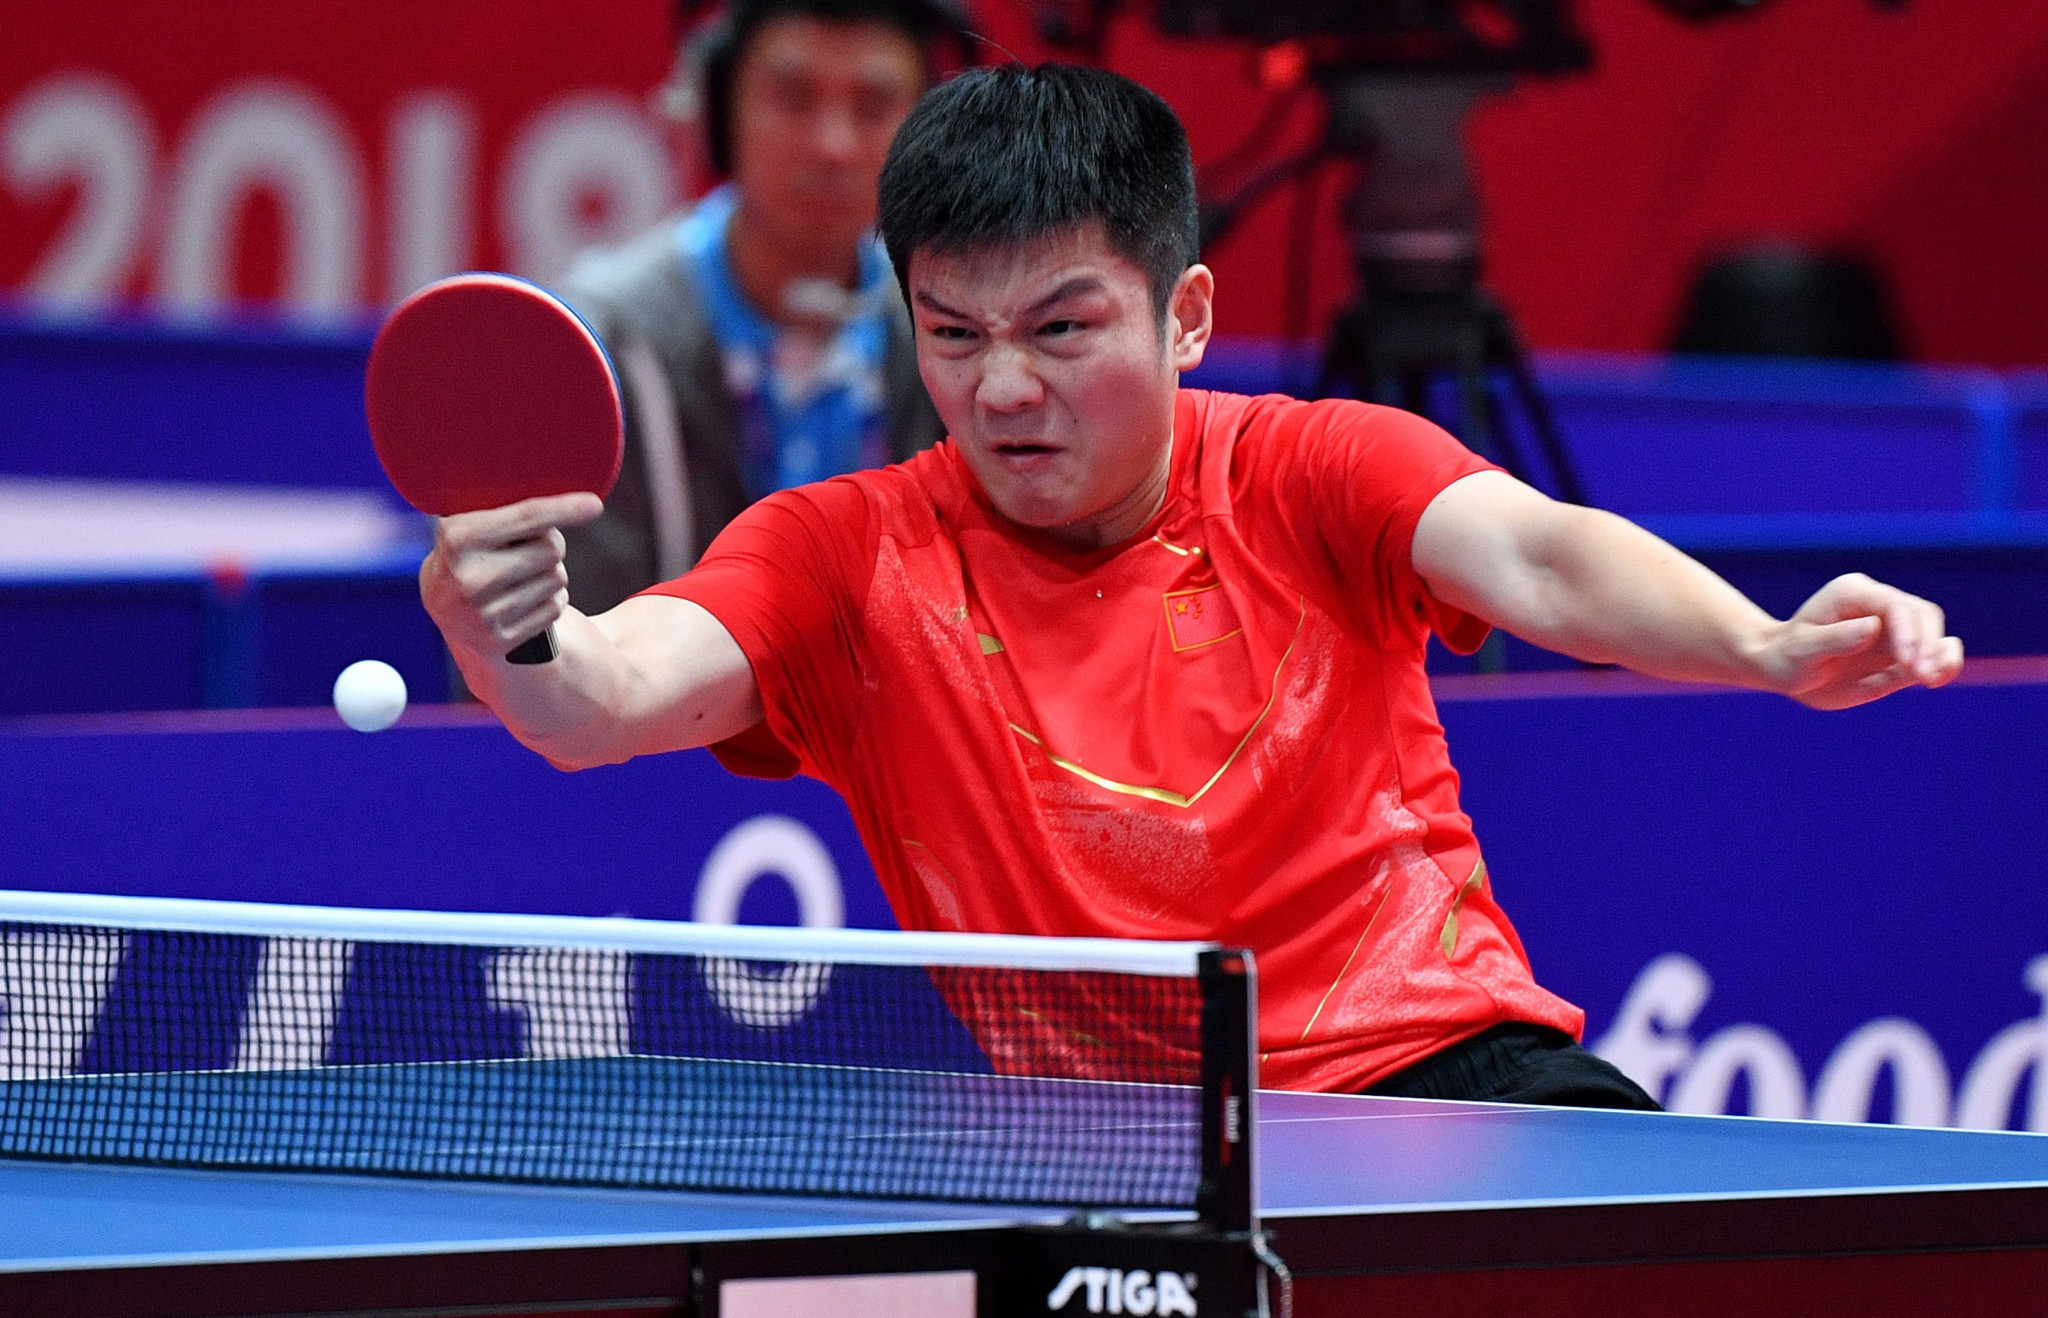 China cruised to victory today in both the men's and women's team table tennis finals ©Getty Images